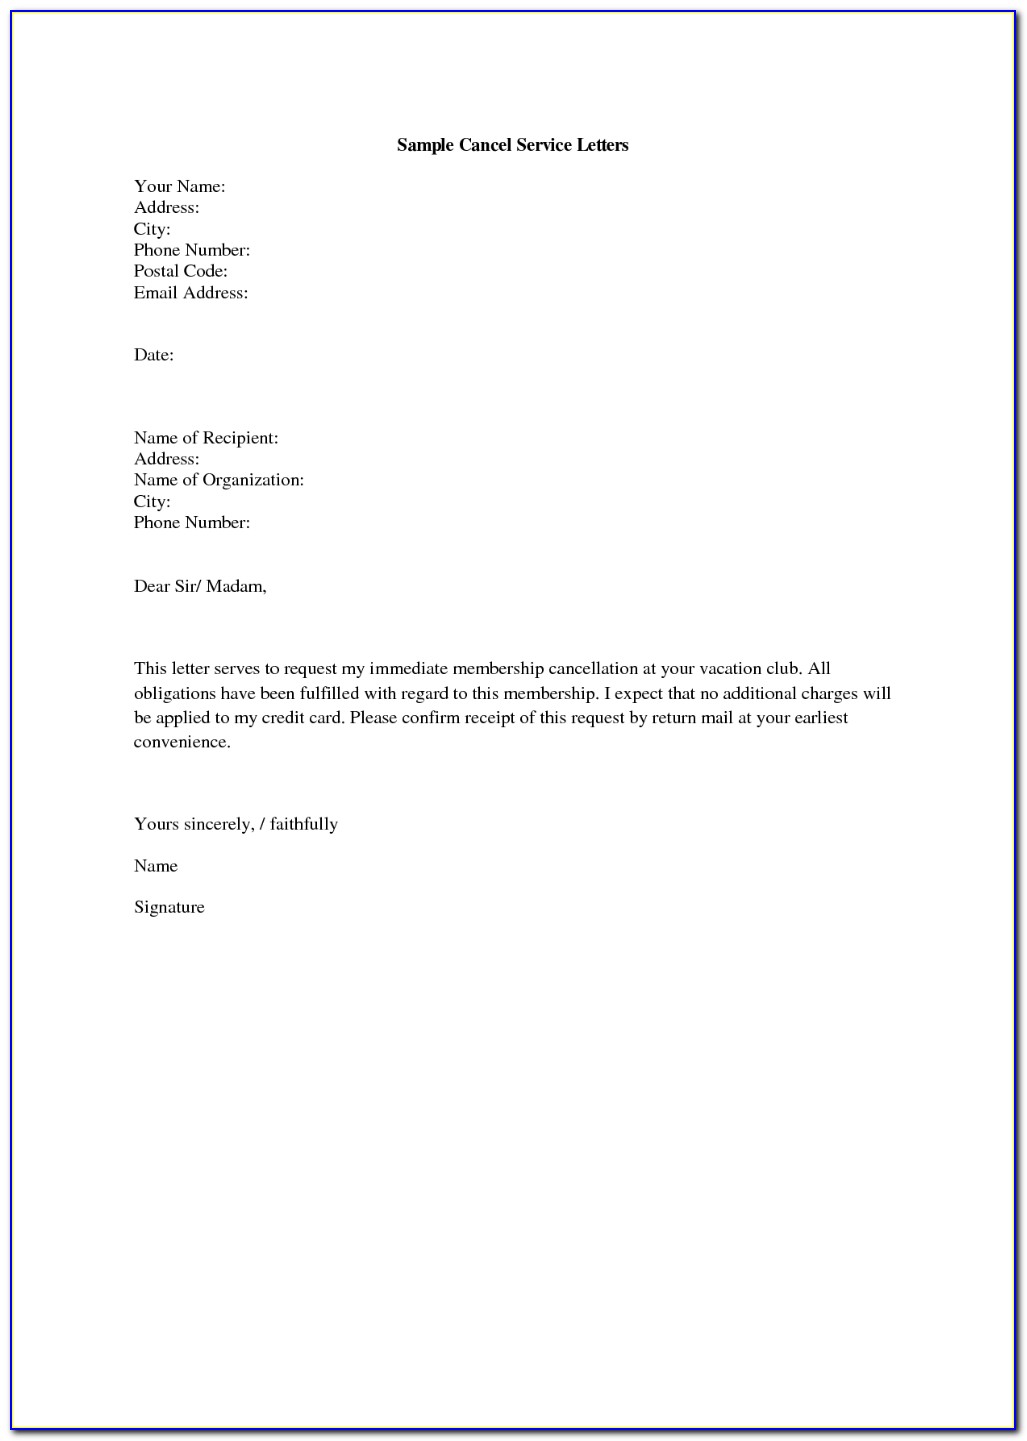 Planet Fitness Termination Letter